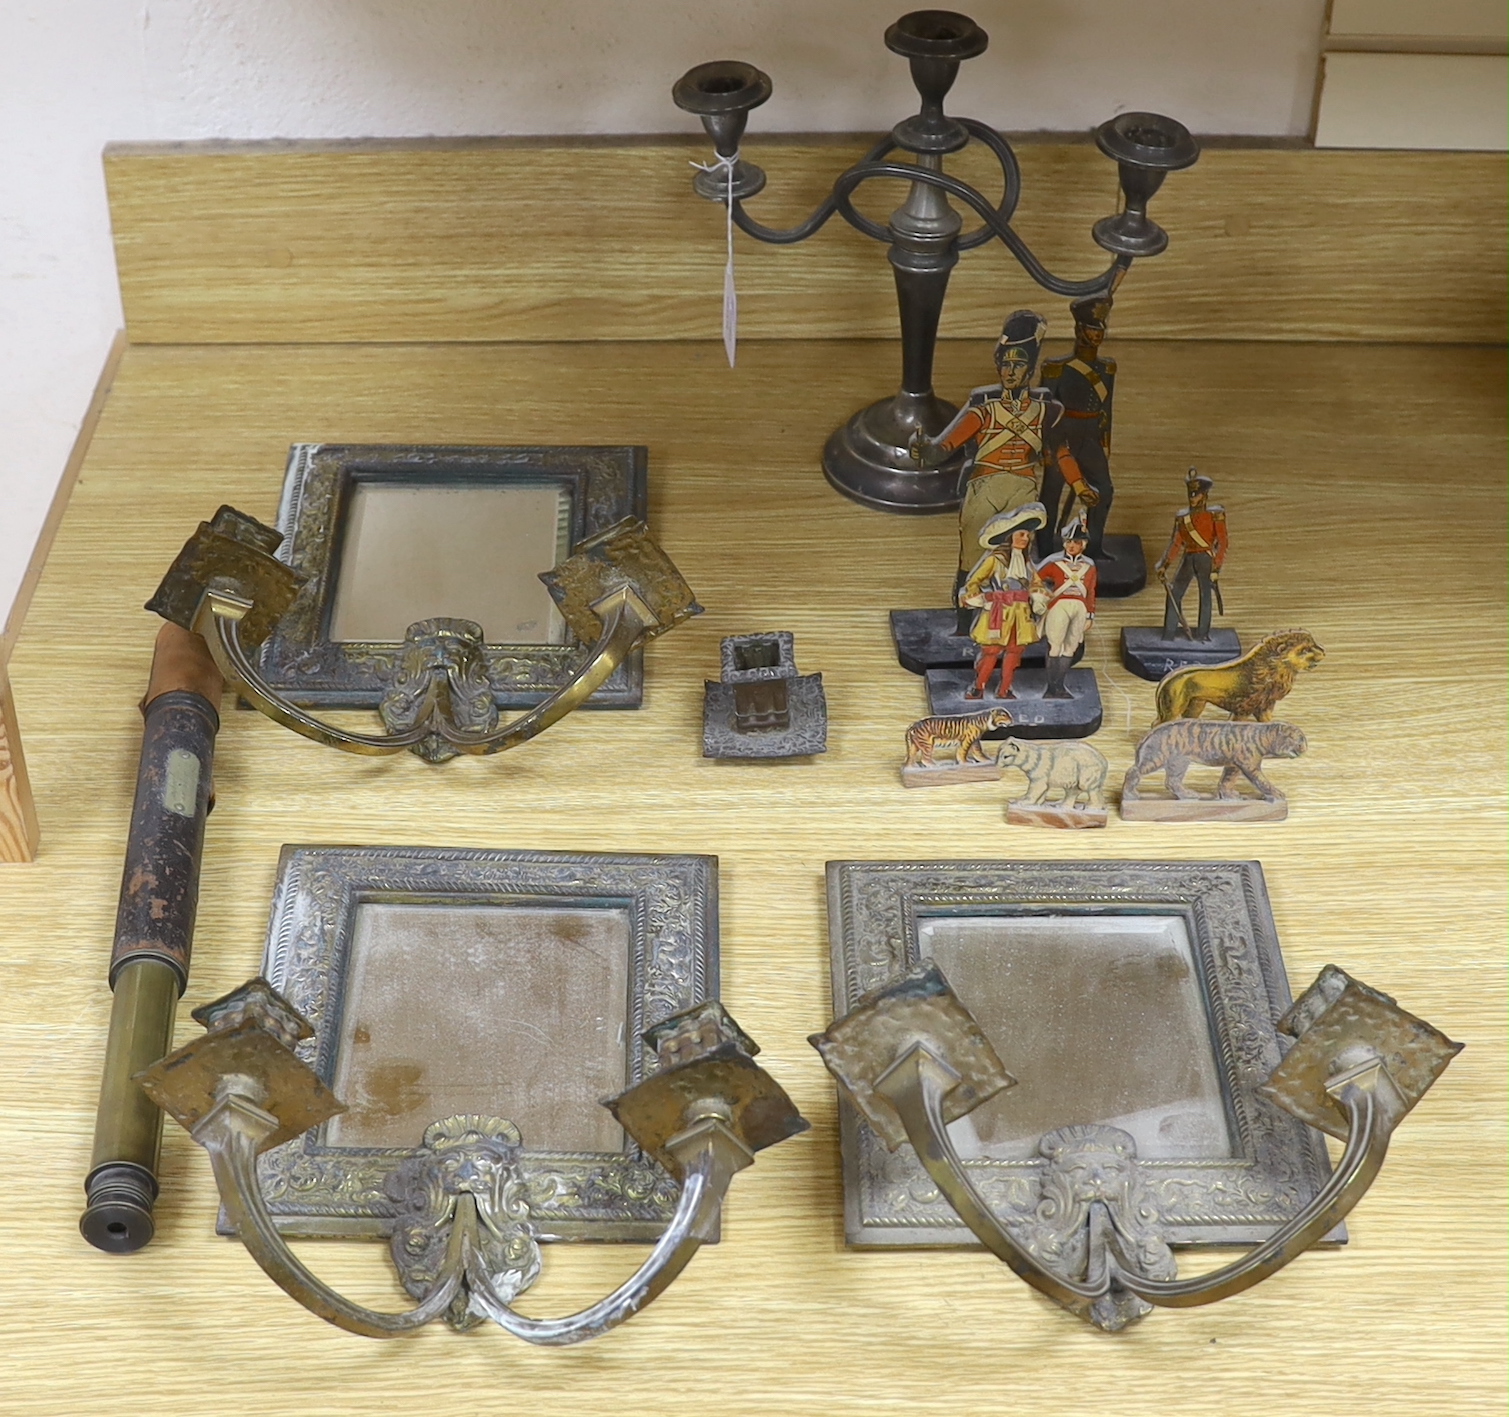 A set of three Victorian mirrored candle sconces together with various other items including a telescope